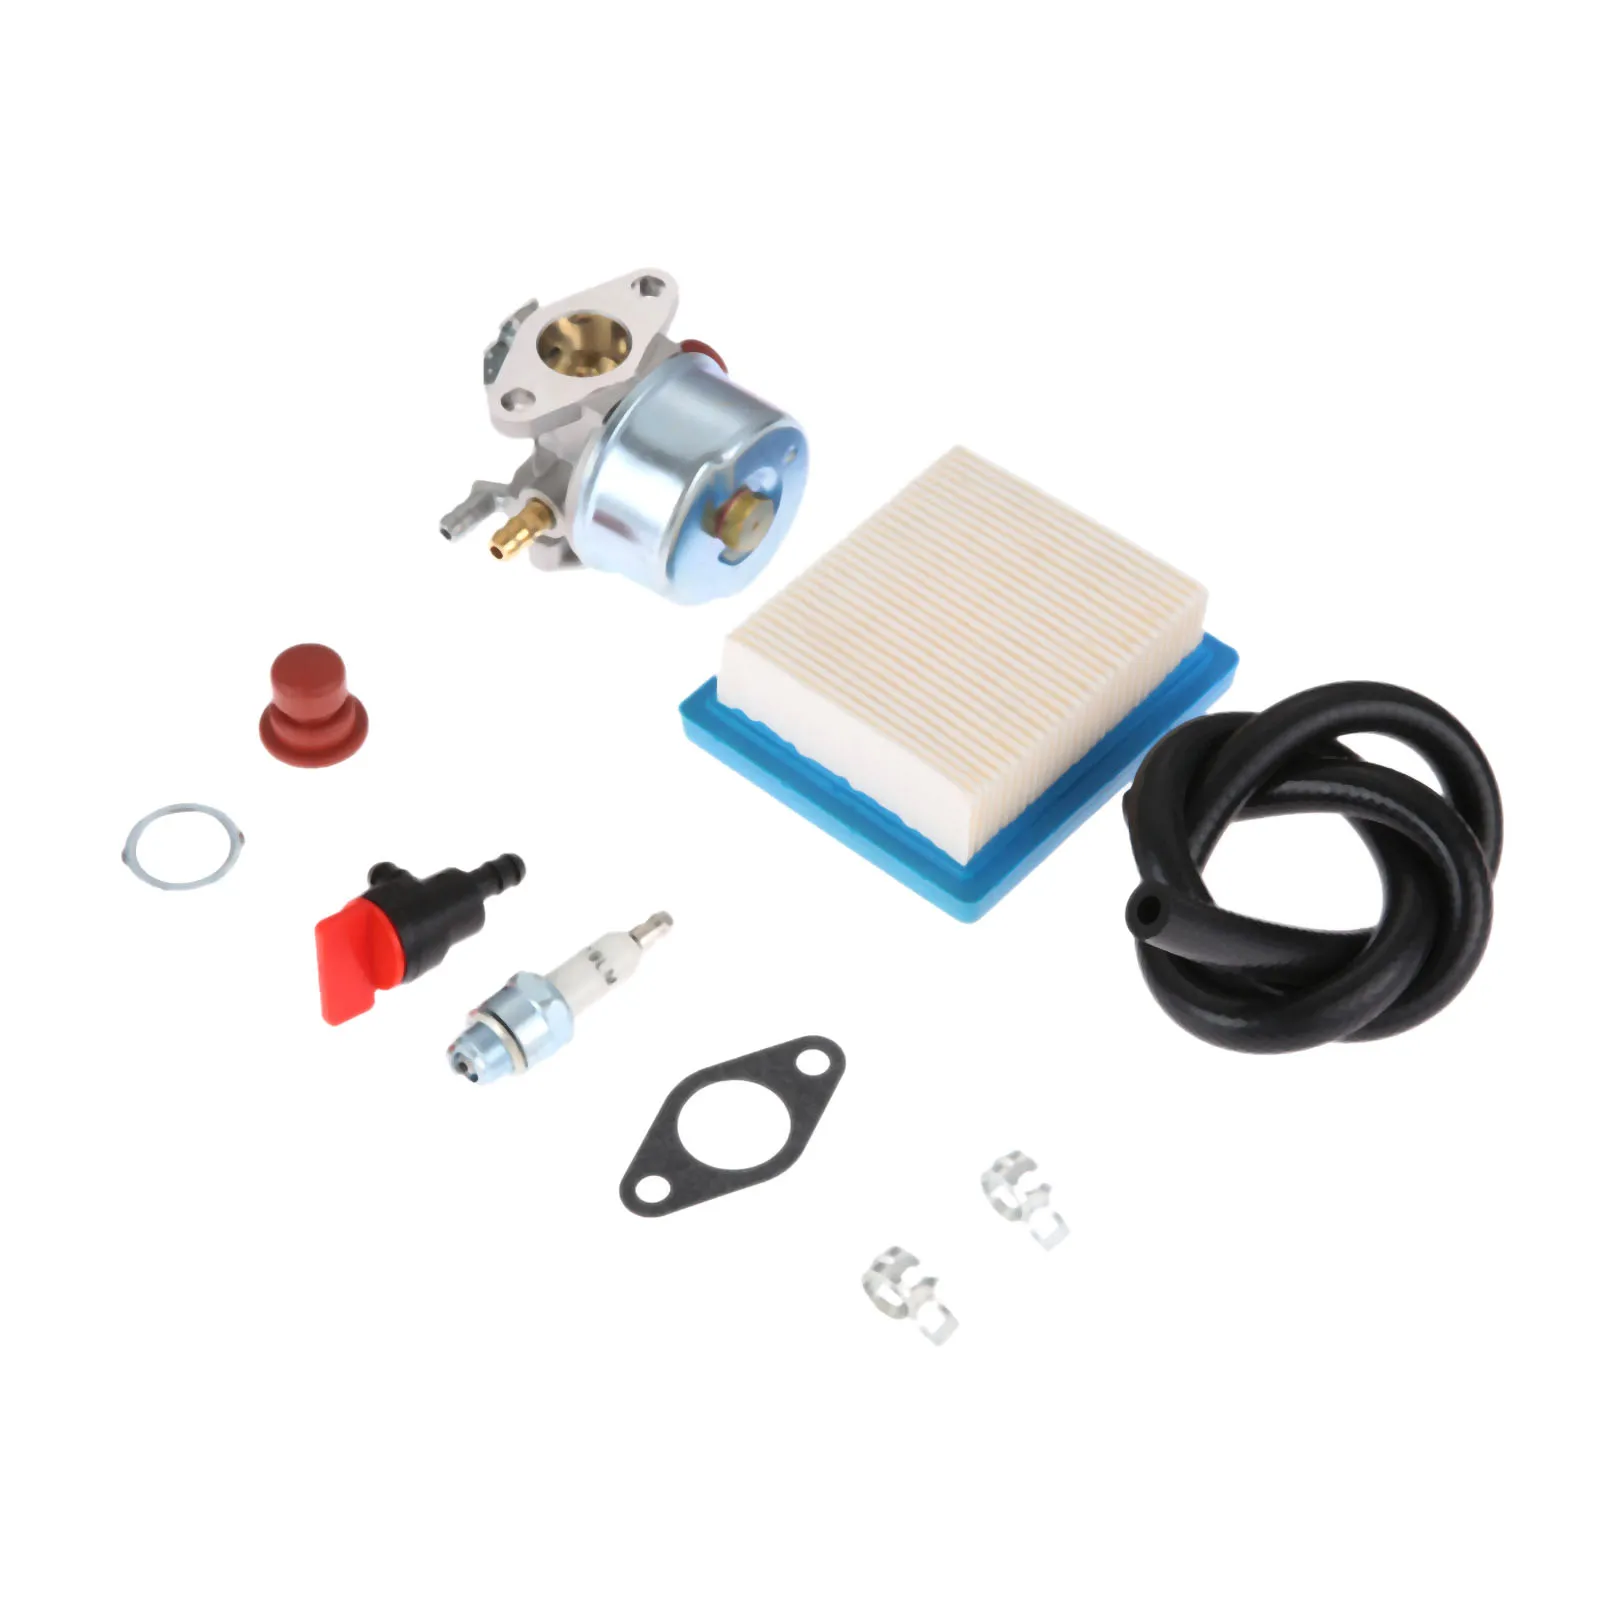 Carburetor Kit For Tecumseh OHH45 OHH50 OHH55 OHH60 OHH65 Engine Replaces #640004 640014 640025 640017B 640117 640117B Durable